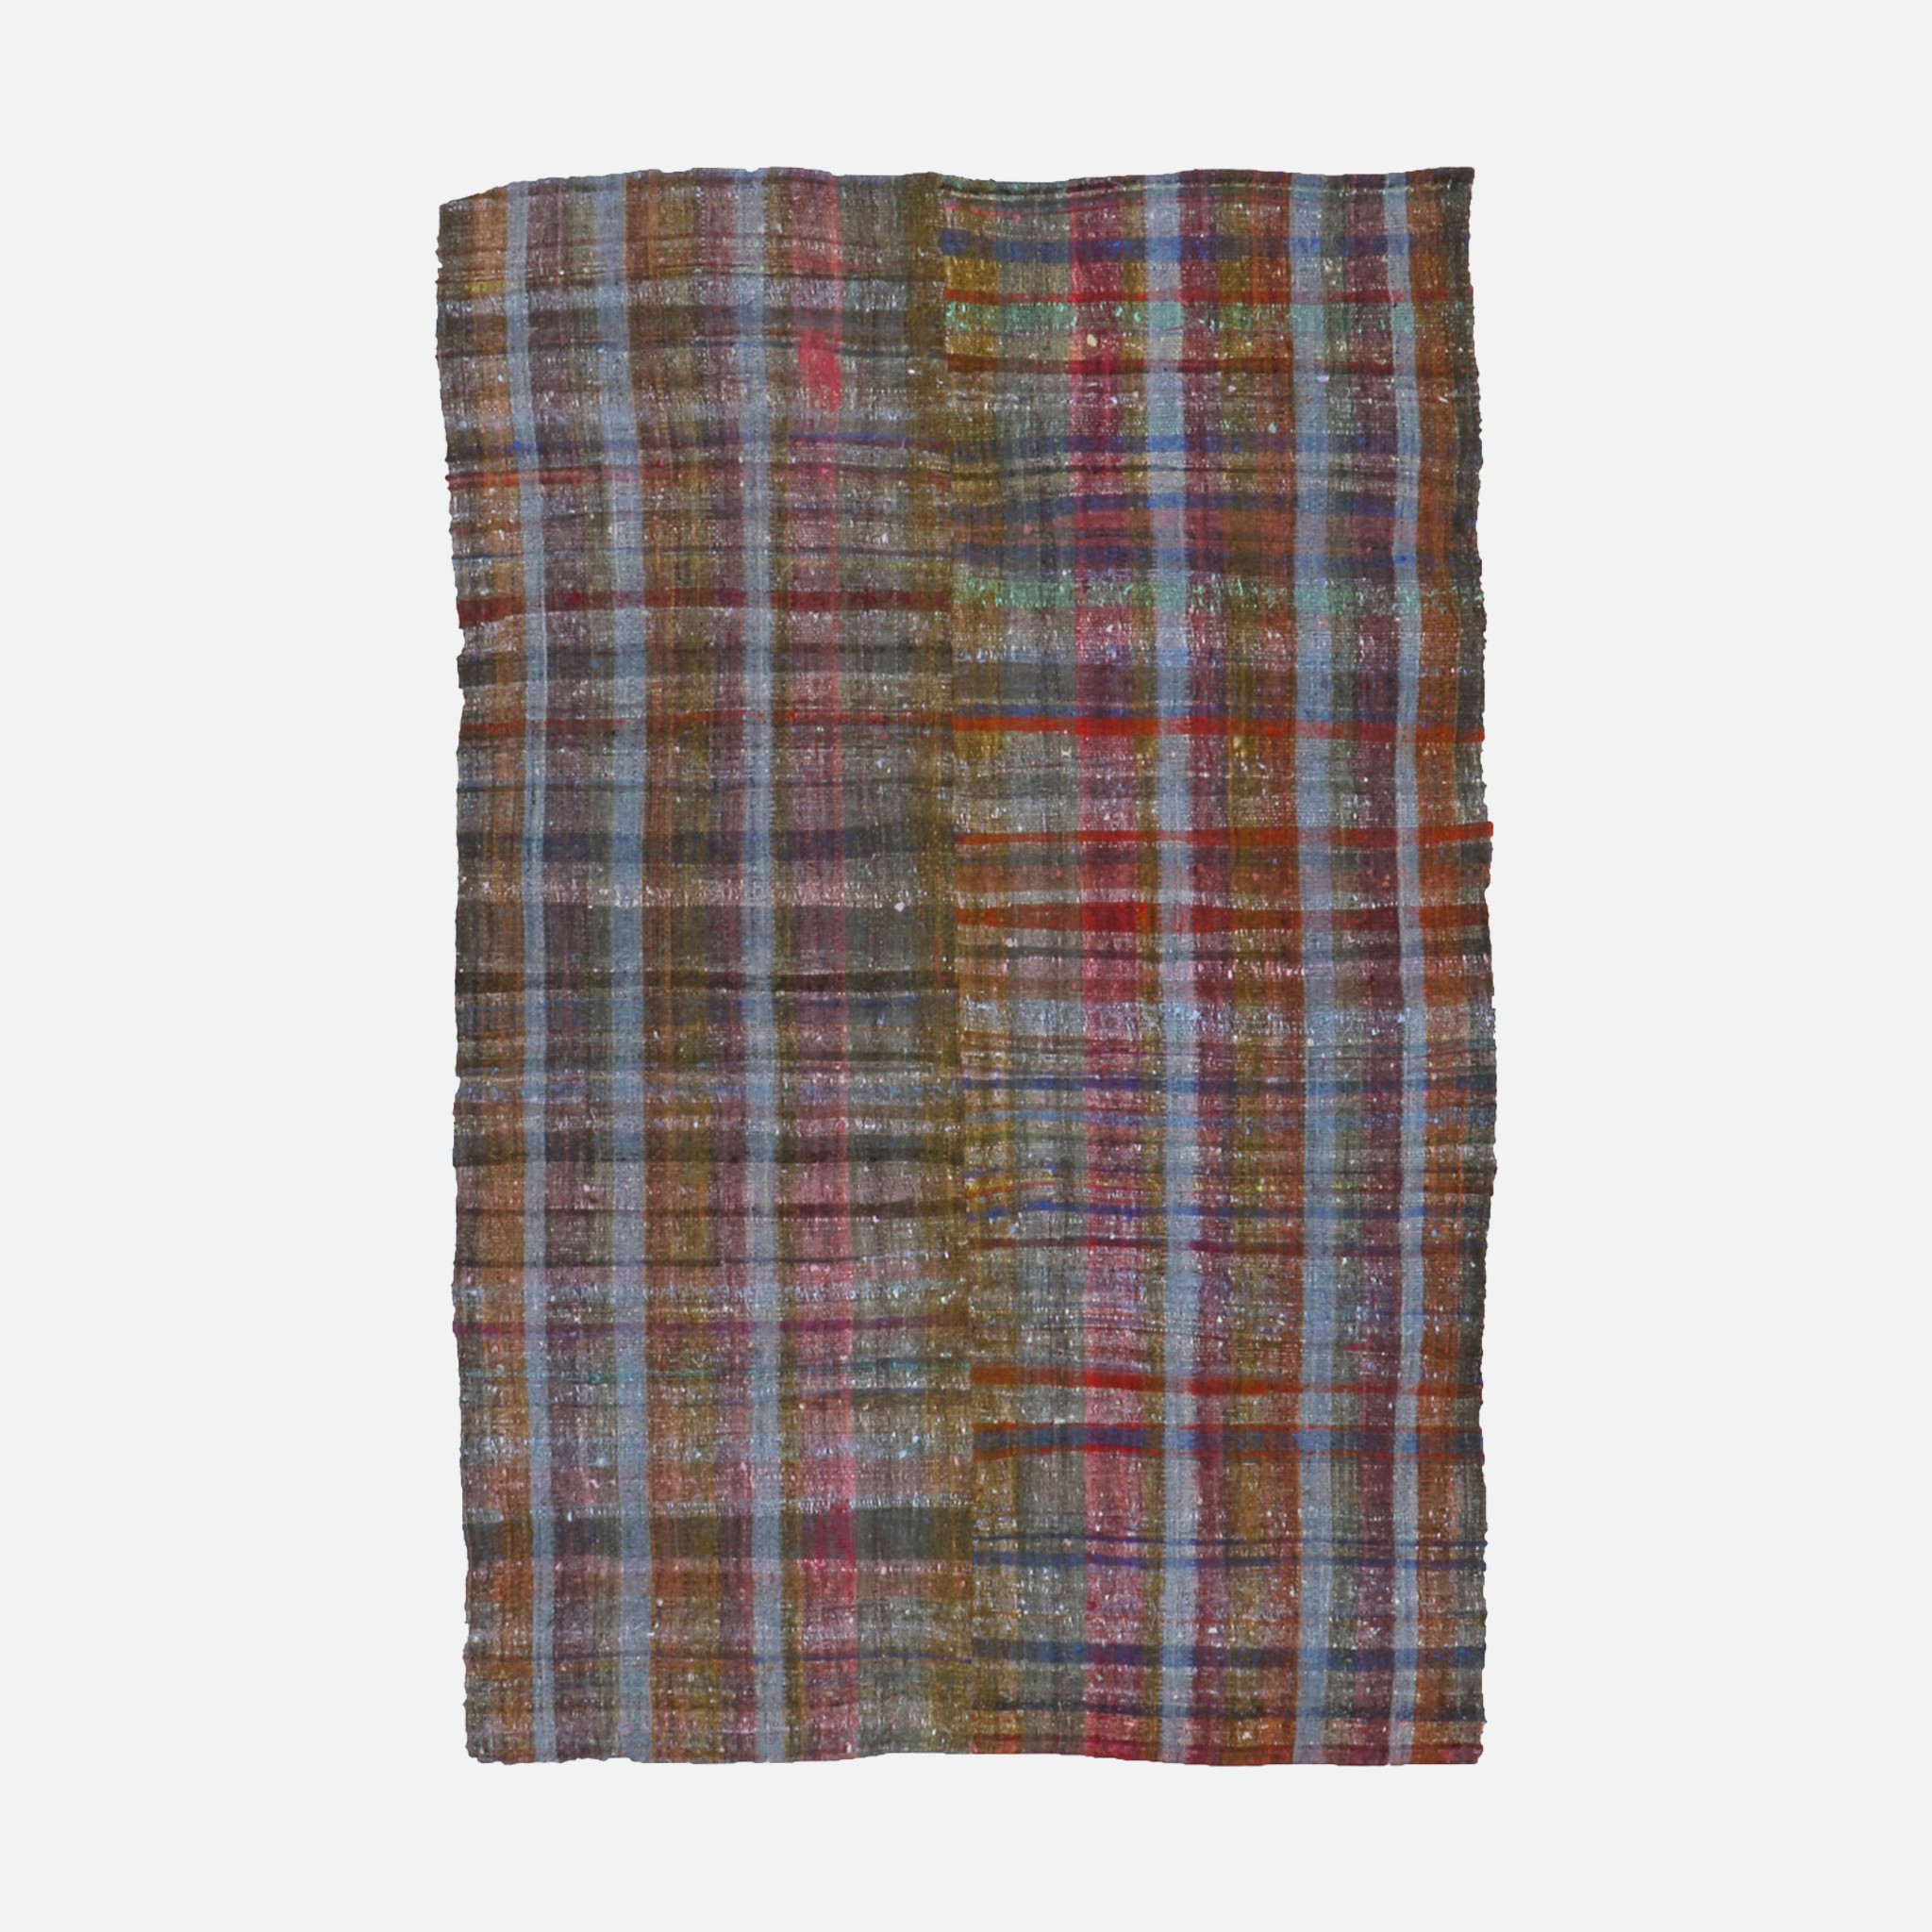 a multicolored plaid rug on a white background